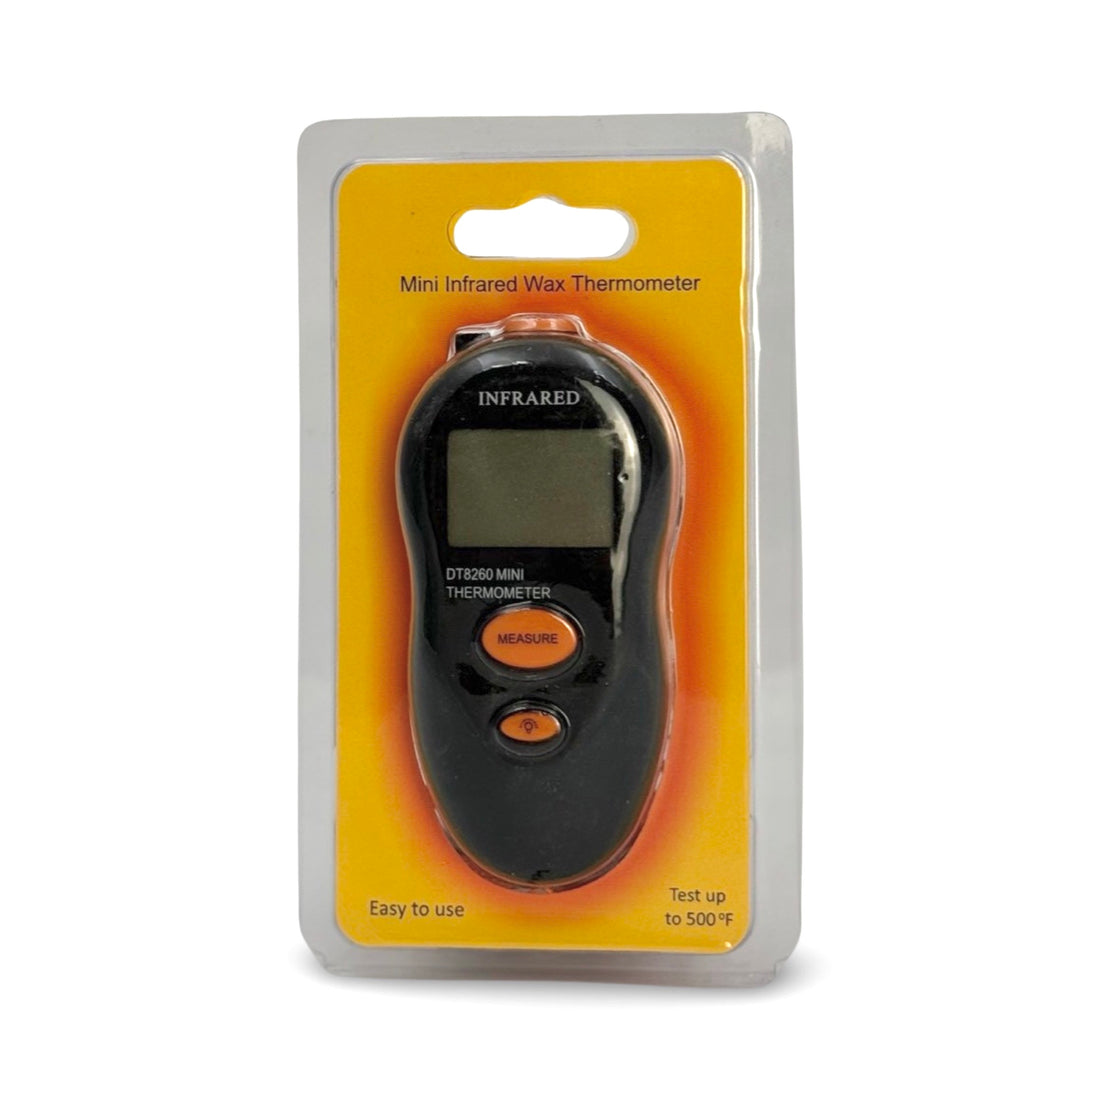 Infrared Wax Thermometer